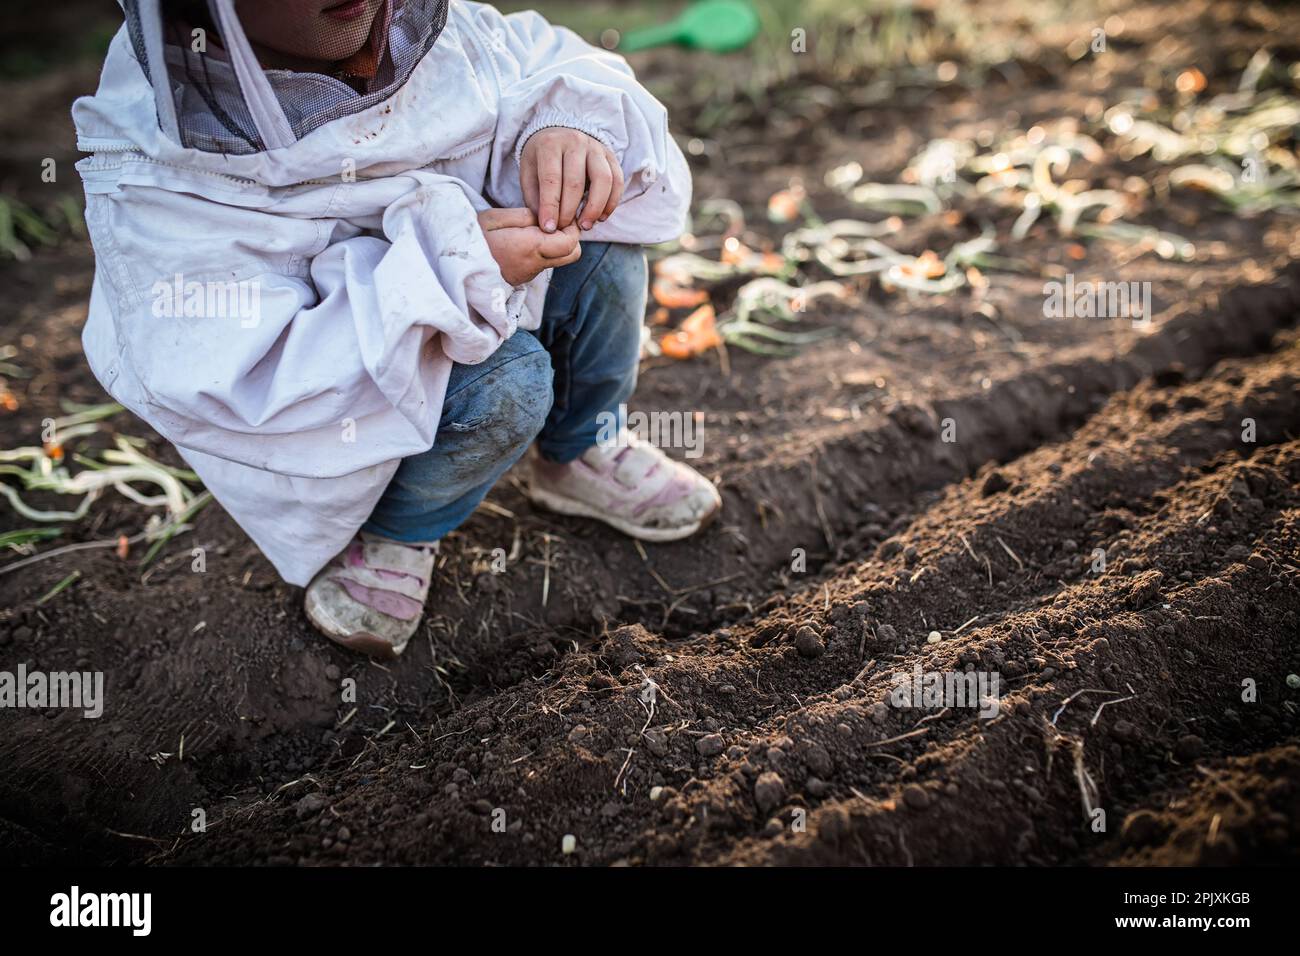 Joy of childhood and pleasures of gardening. little girl lovingly tends to growth of pea plants in summer sun Stock Photo